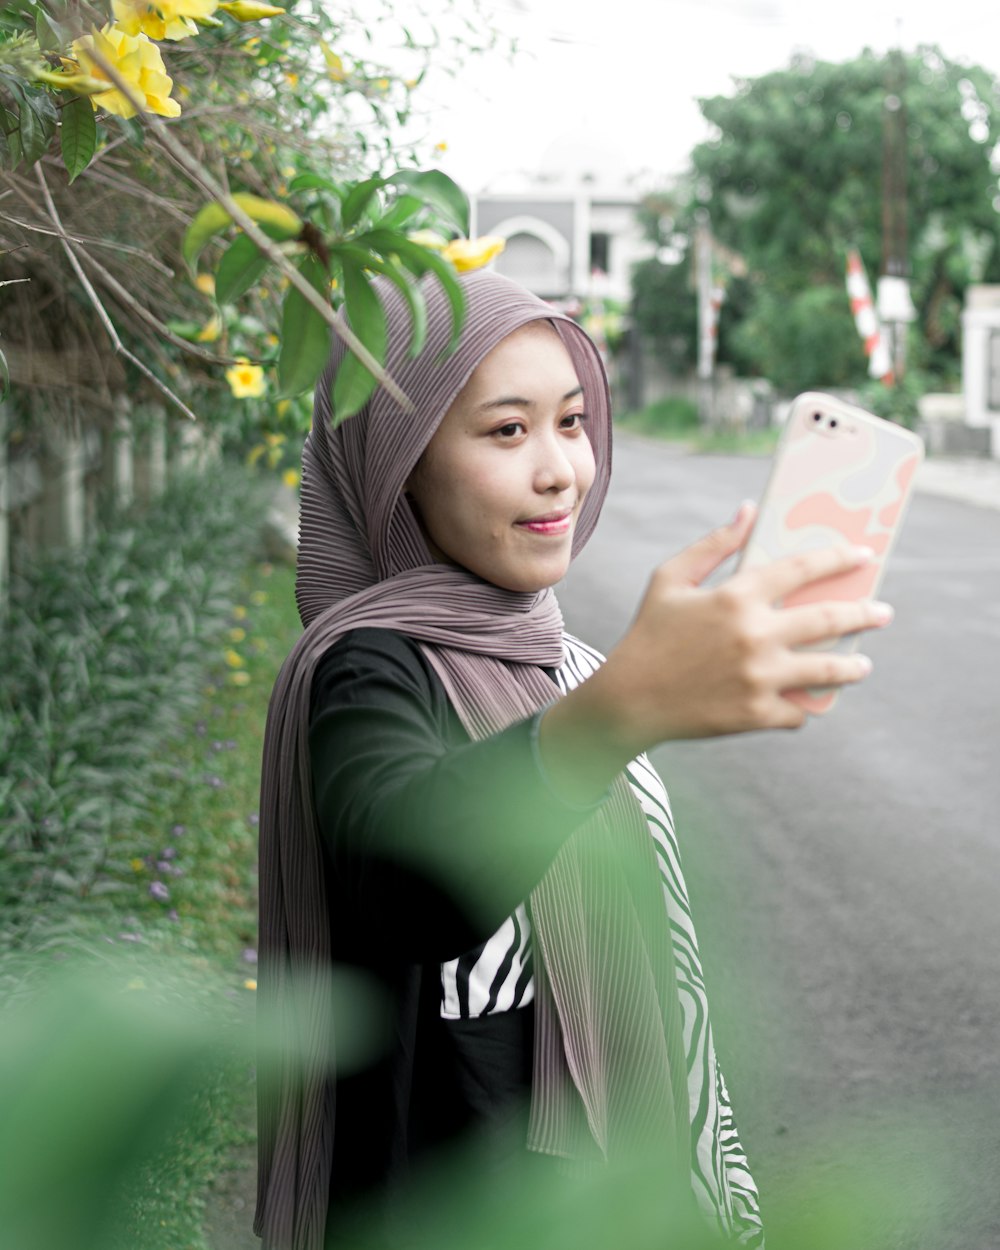 a woman in a hijab taking a picture with her cell phone